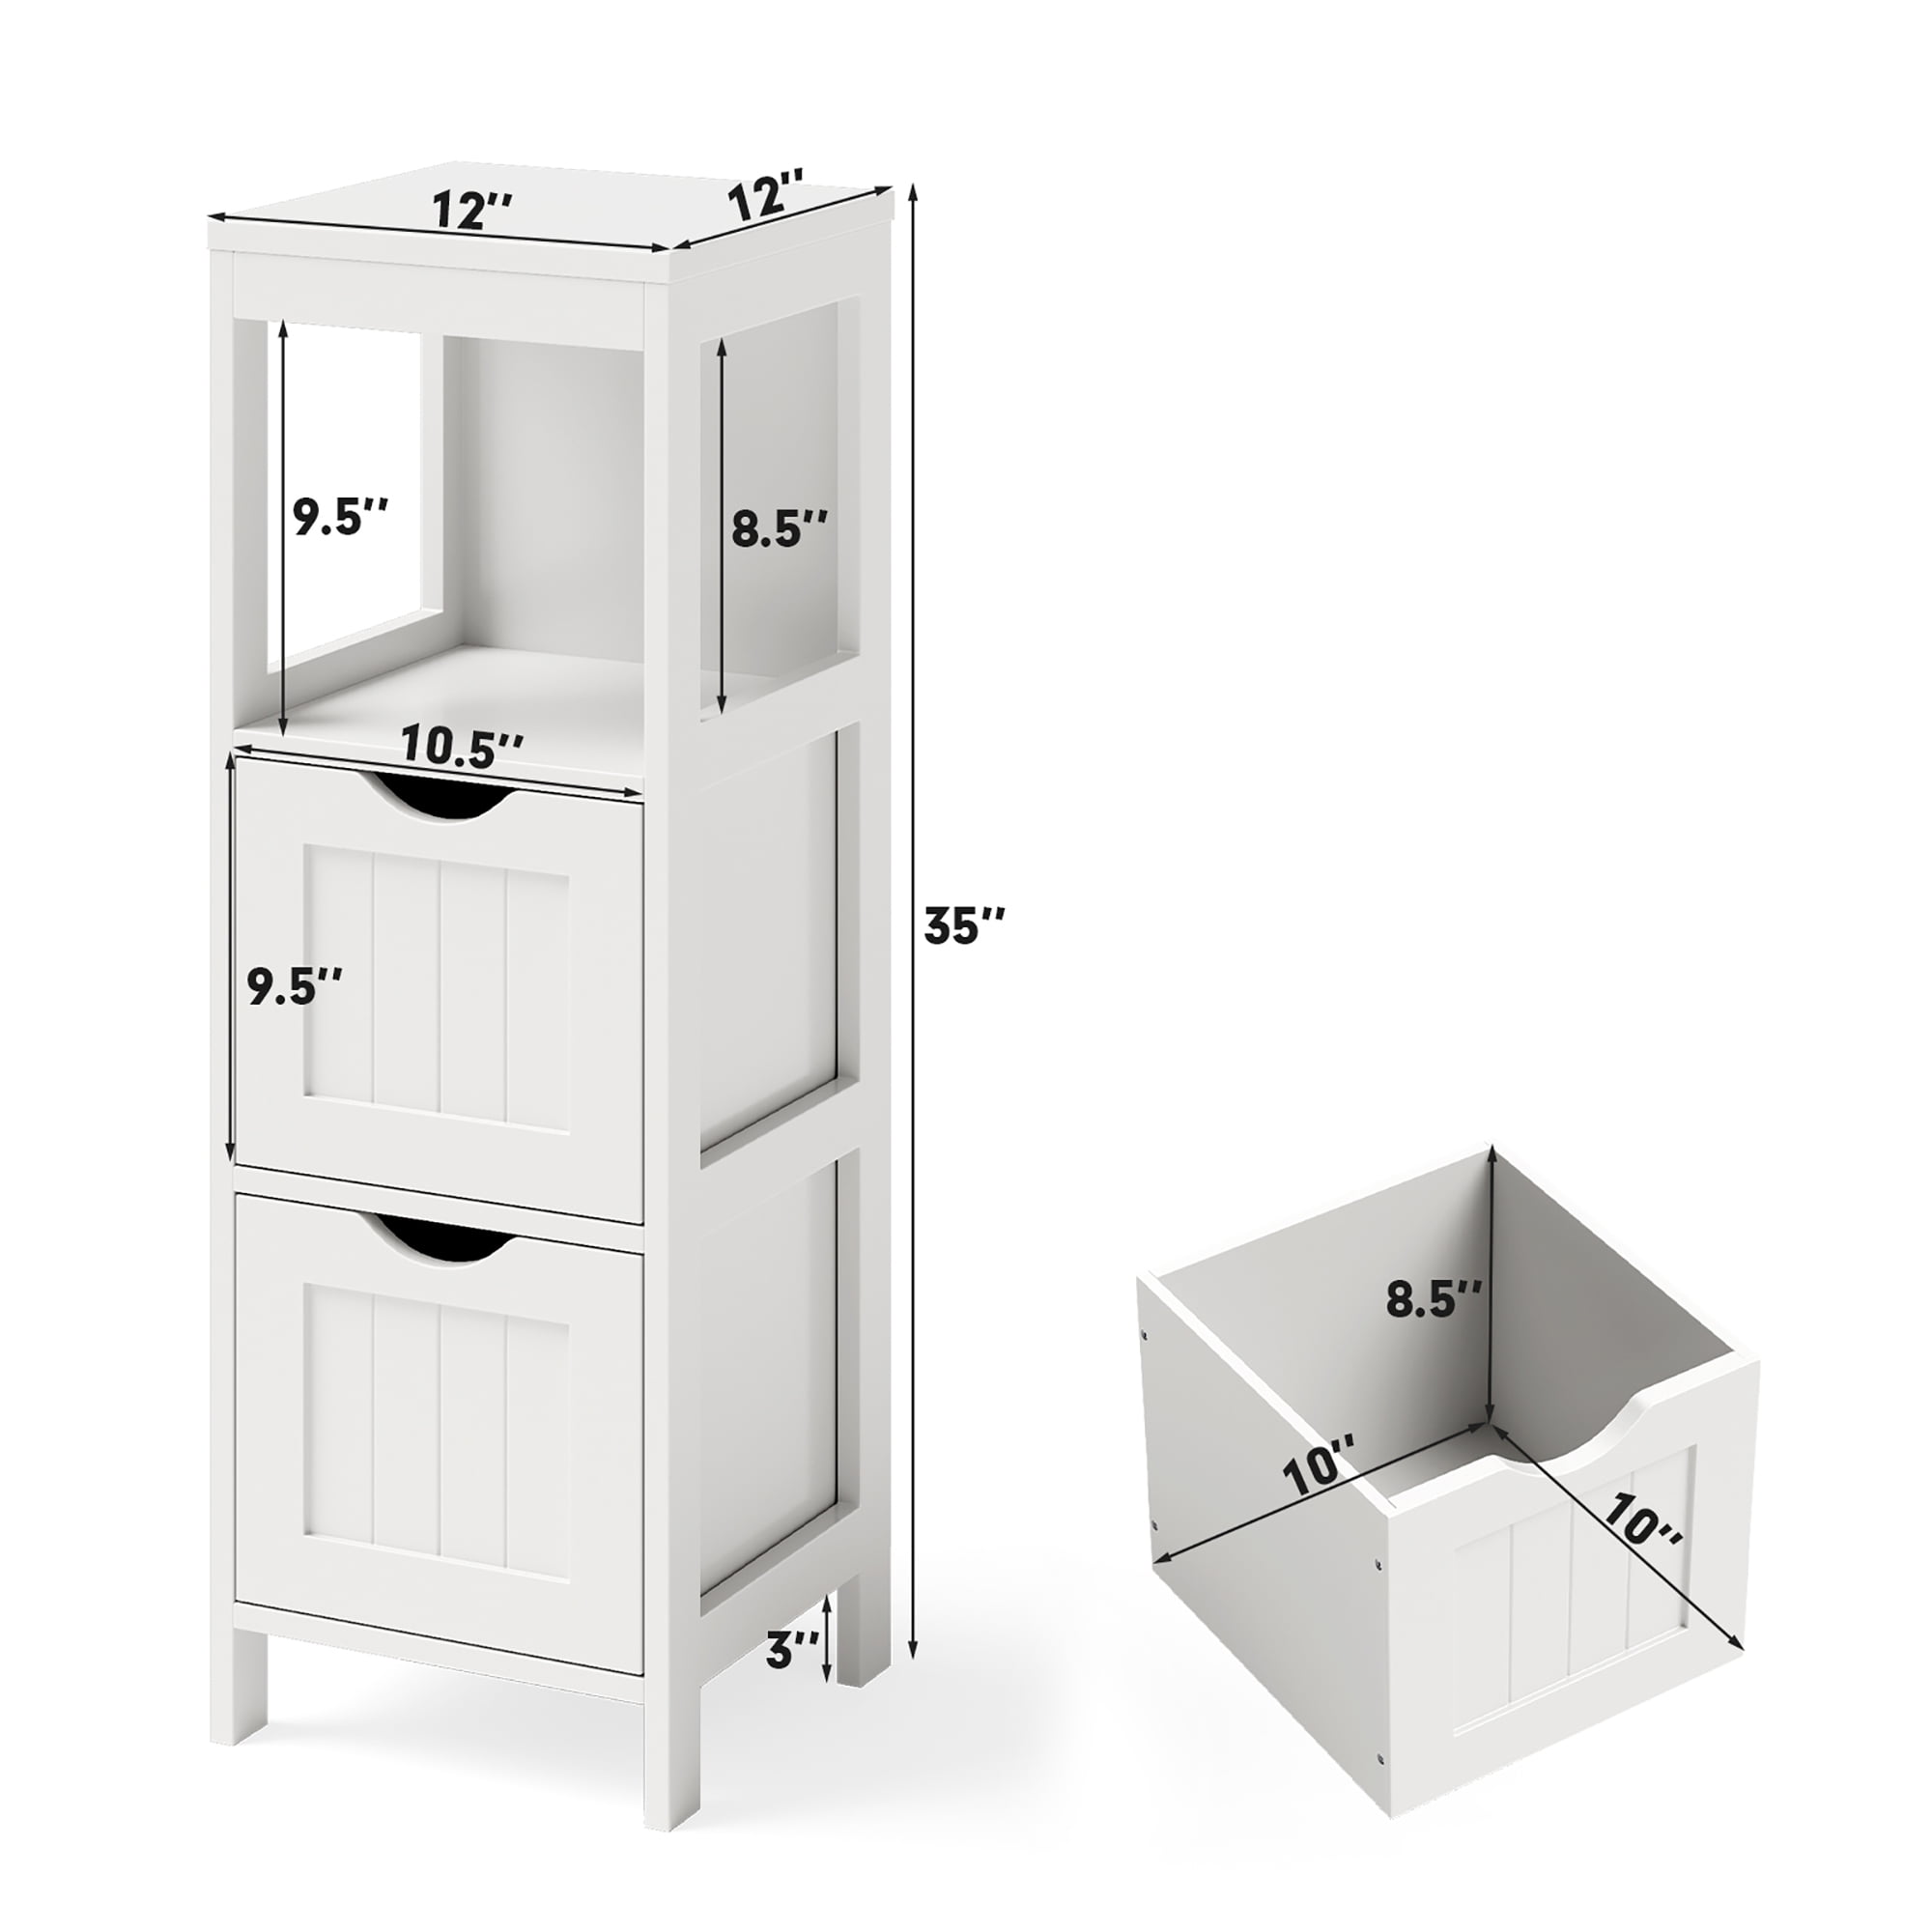 Dropship Floor Cabinet Multifunctional Bathroom Storage Organizer Rack Stand;  2 Drawers Removable to Sell Online at a Lower Price